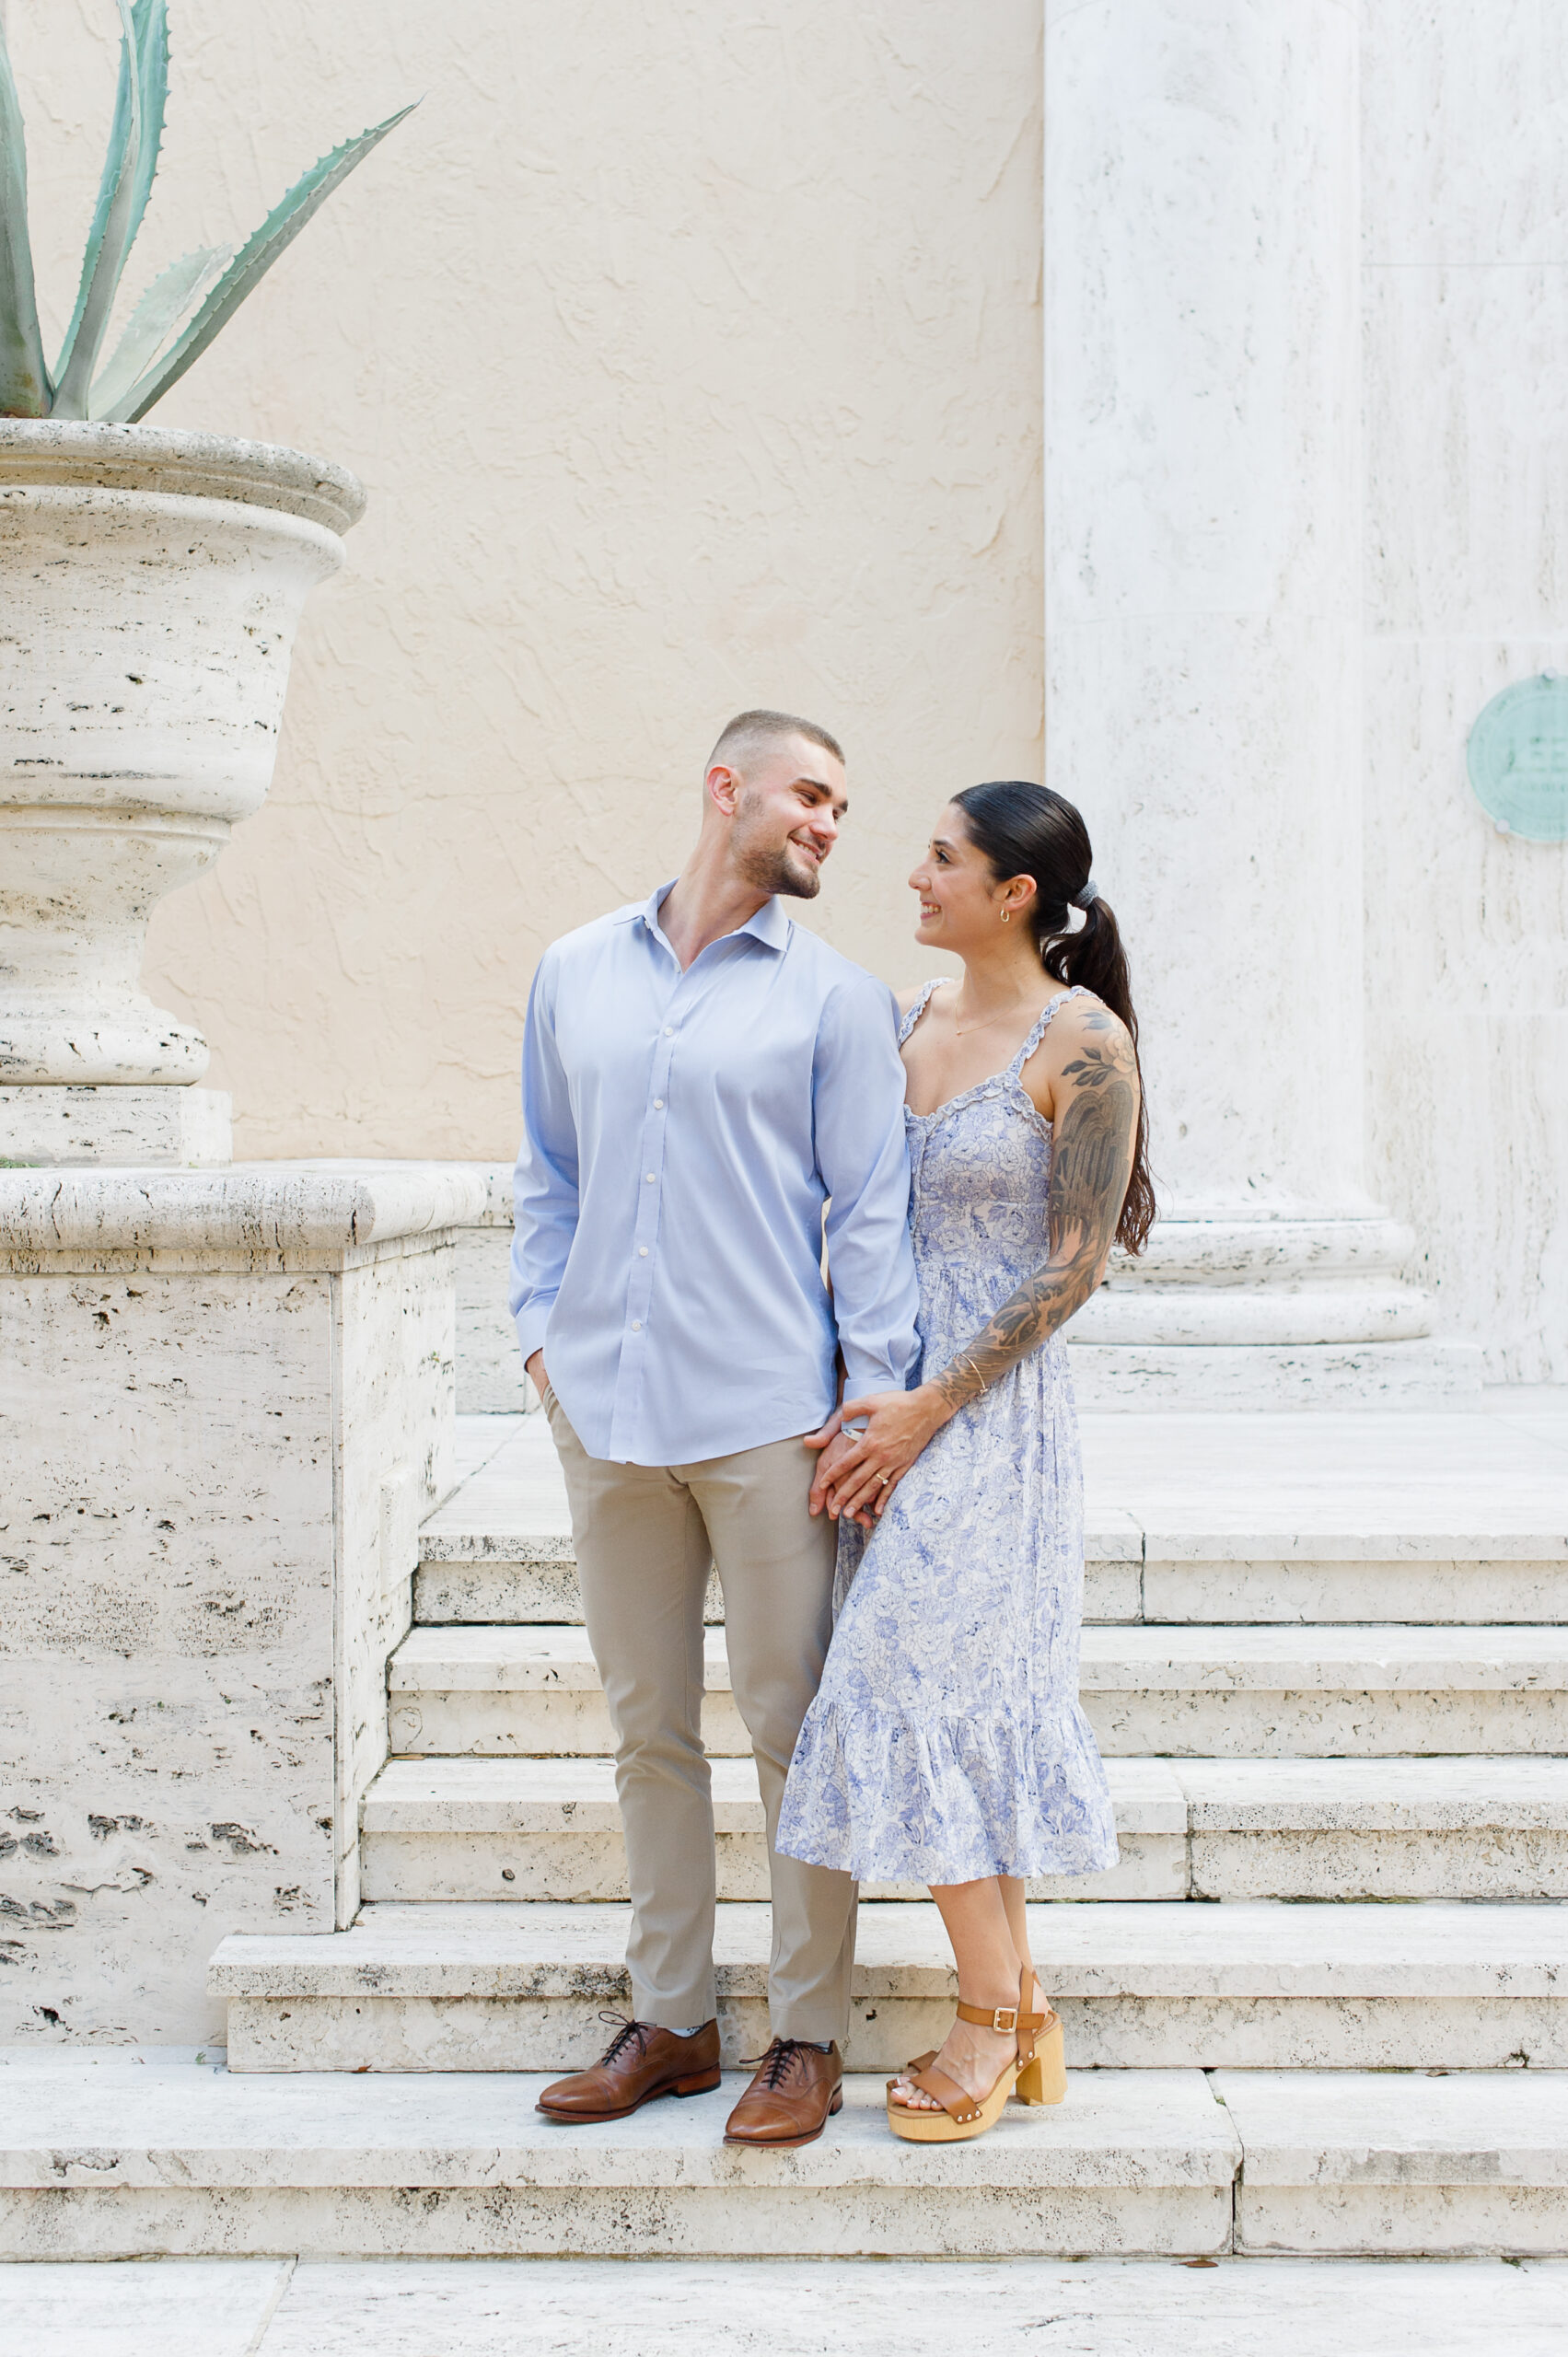 Stunning couple standing on the steps at Rollins College looking at each other.